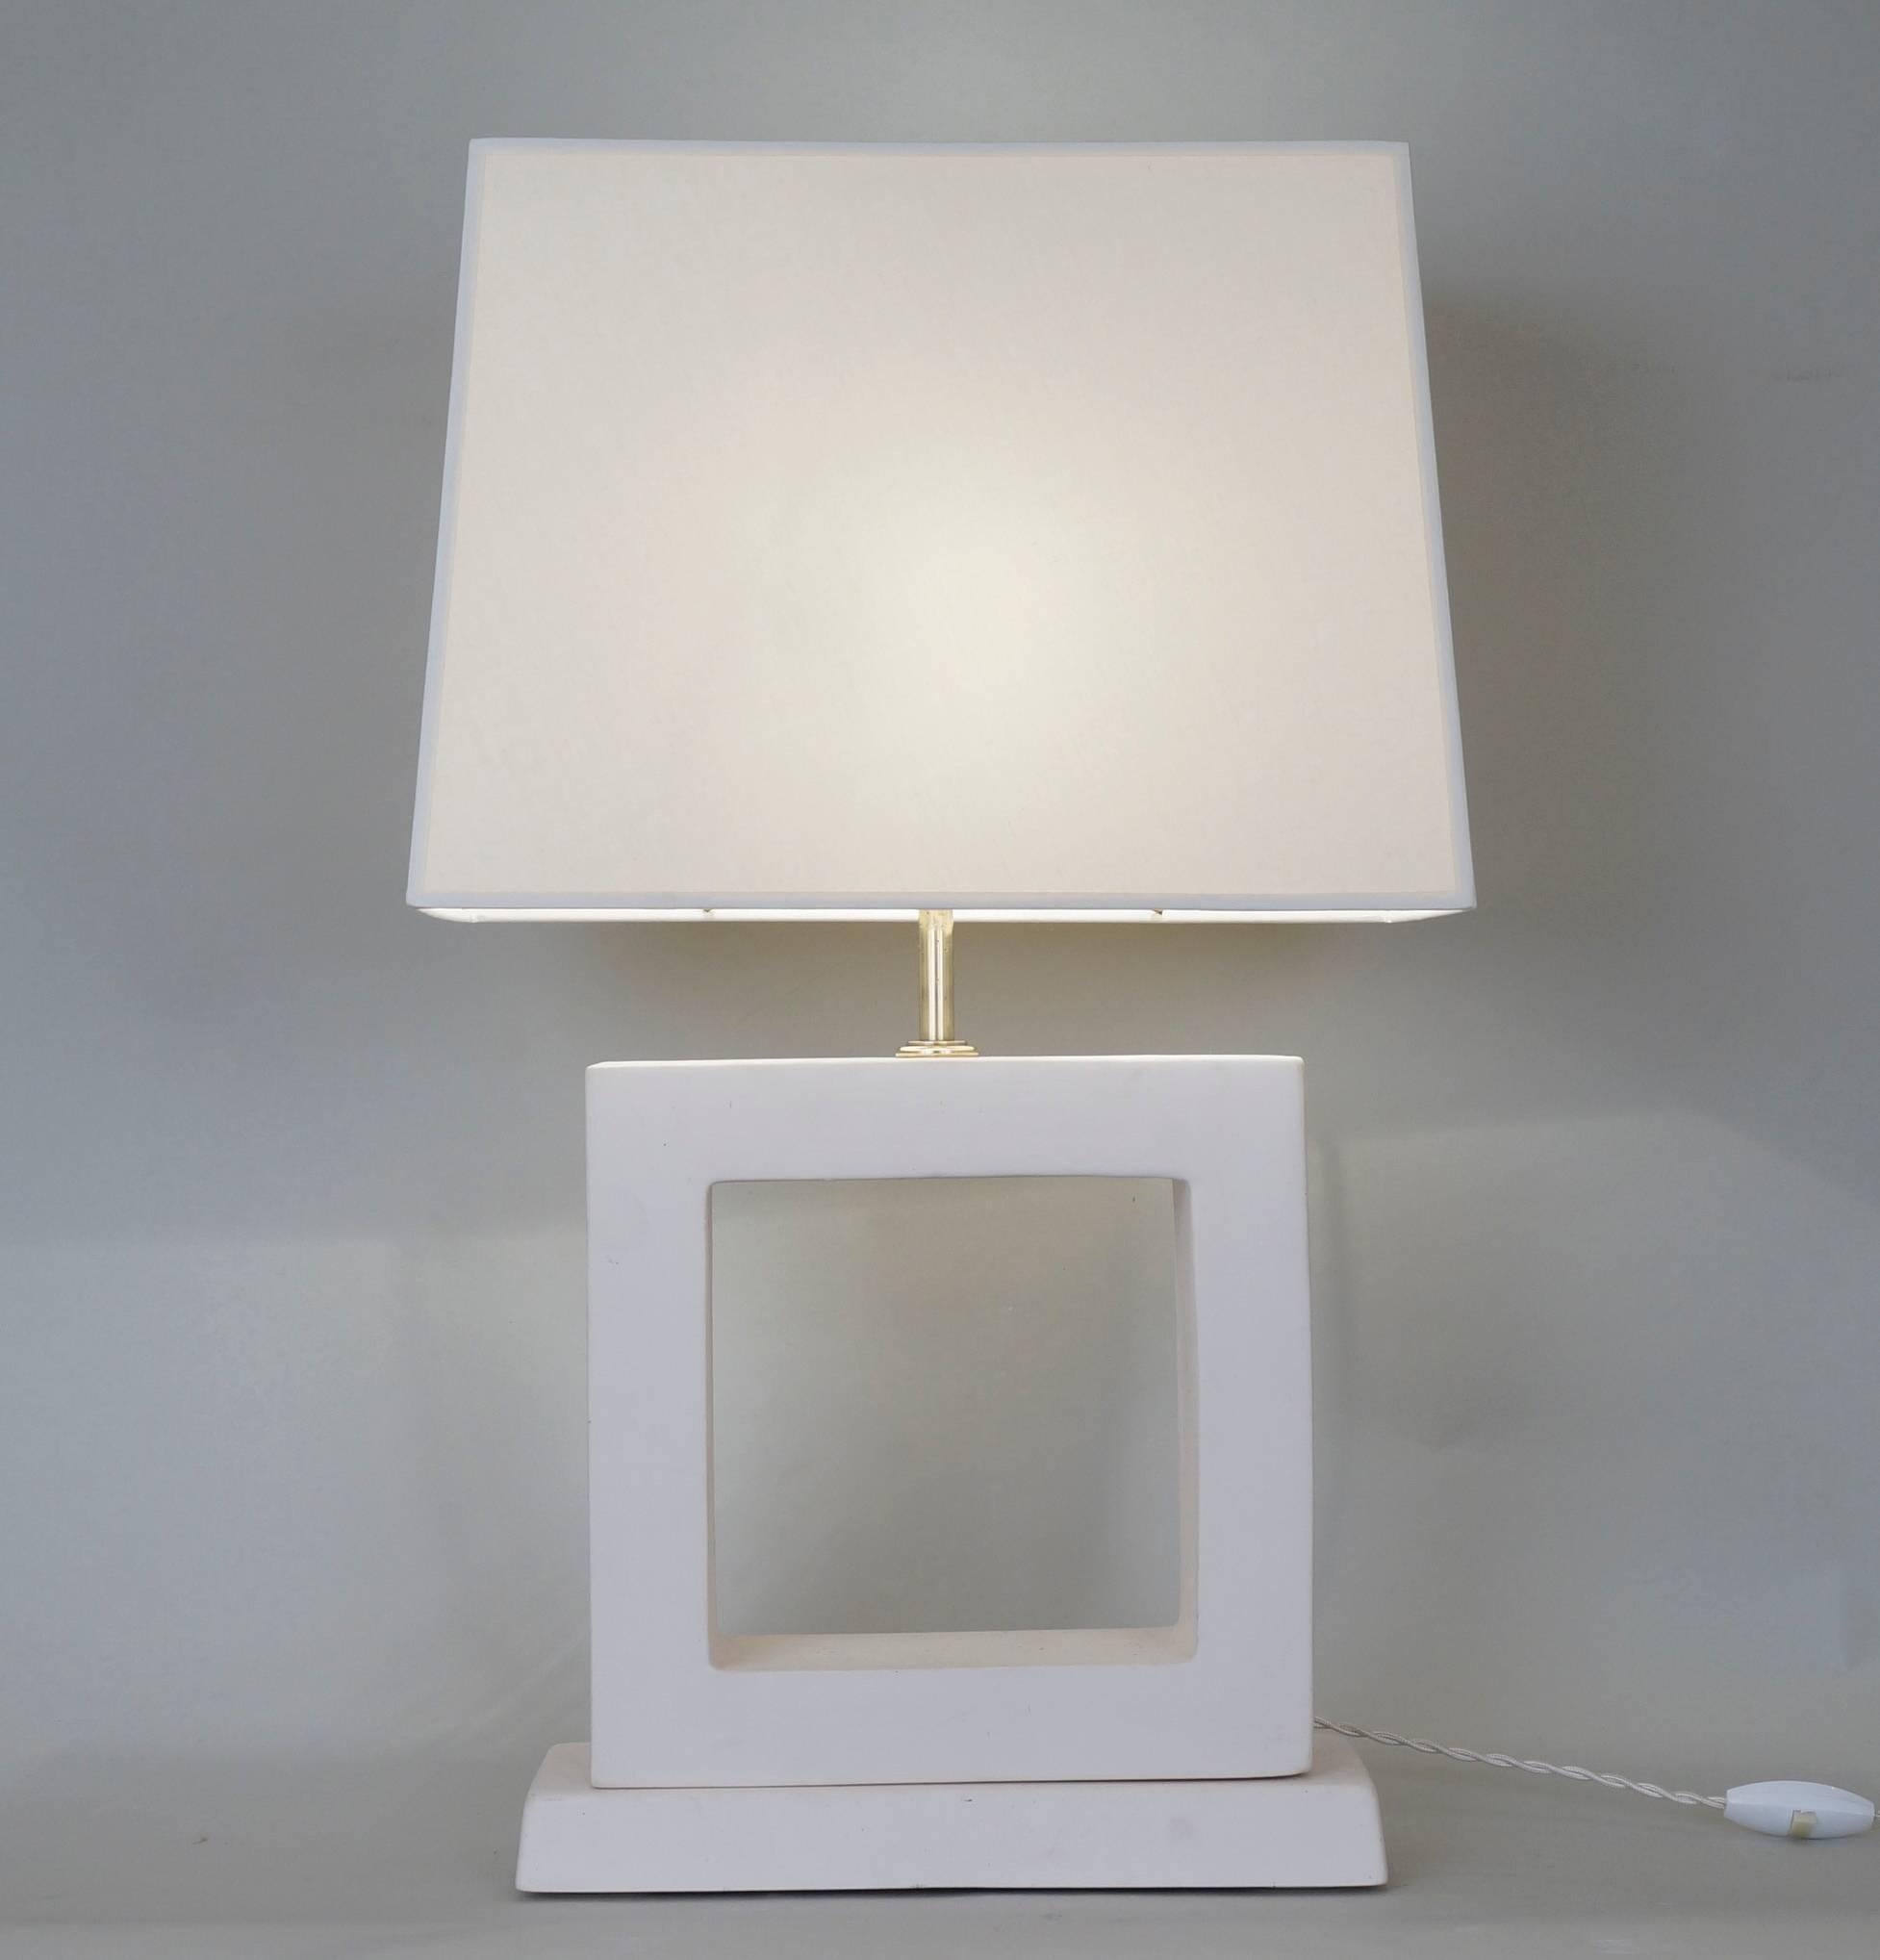 Geometric white unglazed ceramic table lamp.
Custom-made fabric lampshade.
Rewired with twisted silk cord. 
US standard plug on request.
Ceramic: 22 cm - 8.7in.
Height with lampshade: 61 cm - 24in. 

